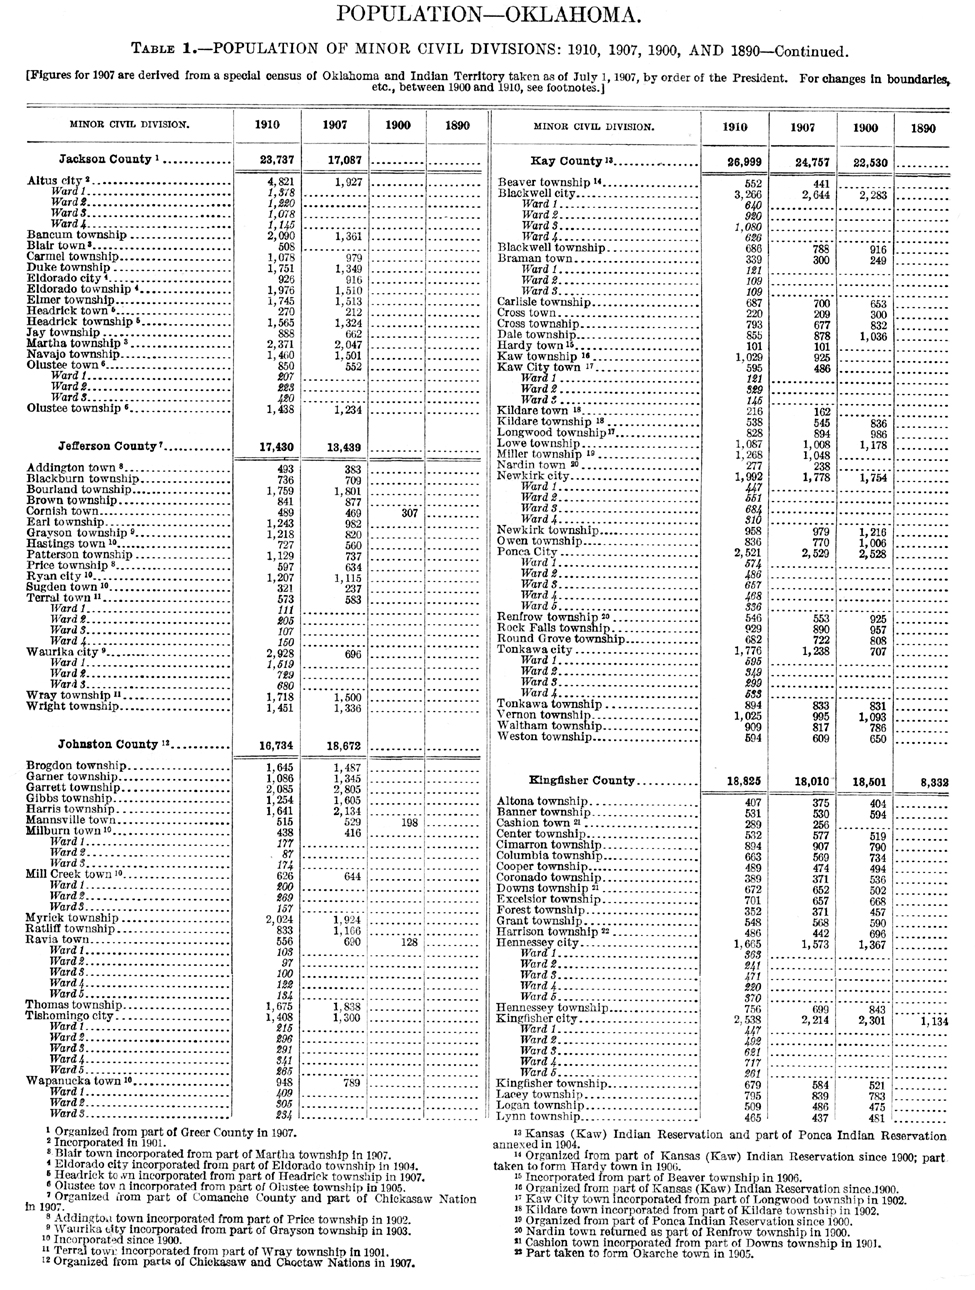 1910 Oklahoma Census, Chapter 1, Table 1, Page 7